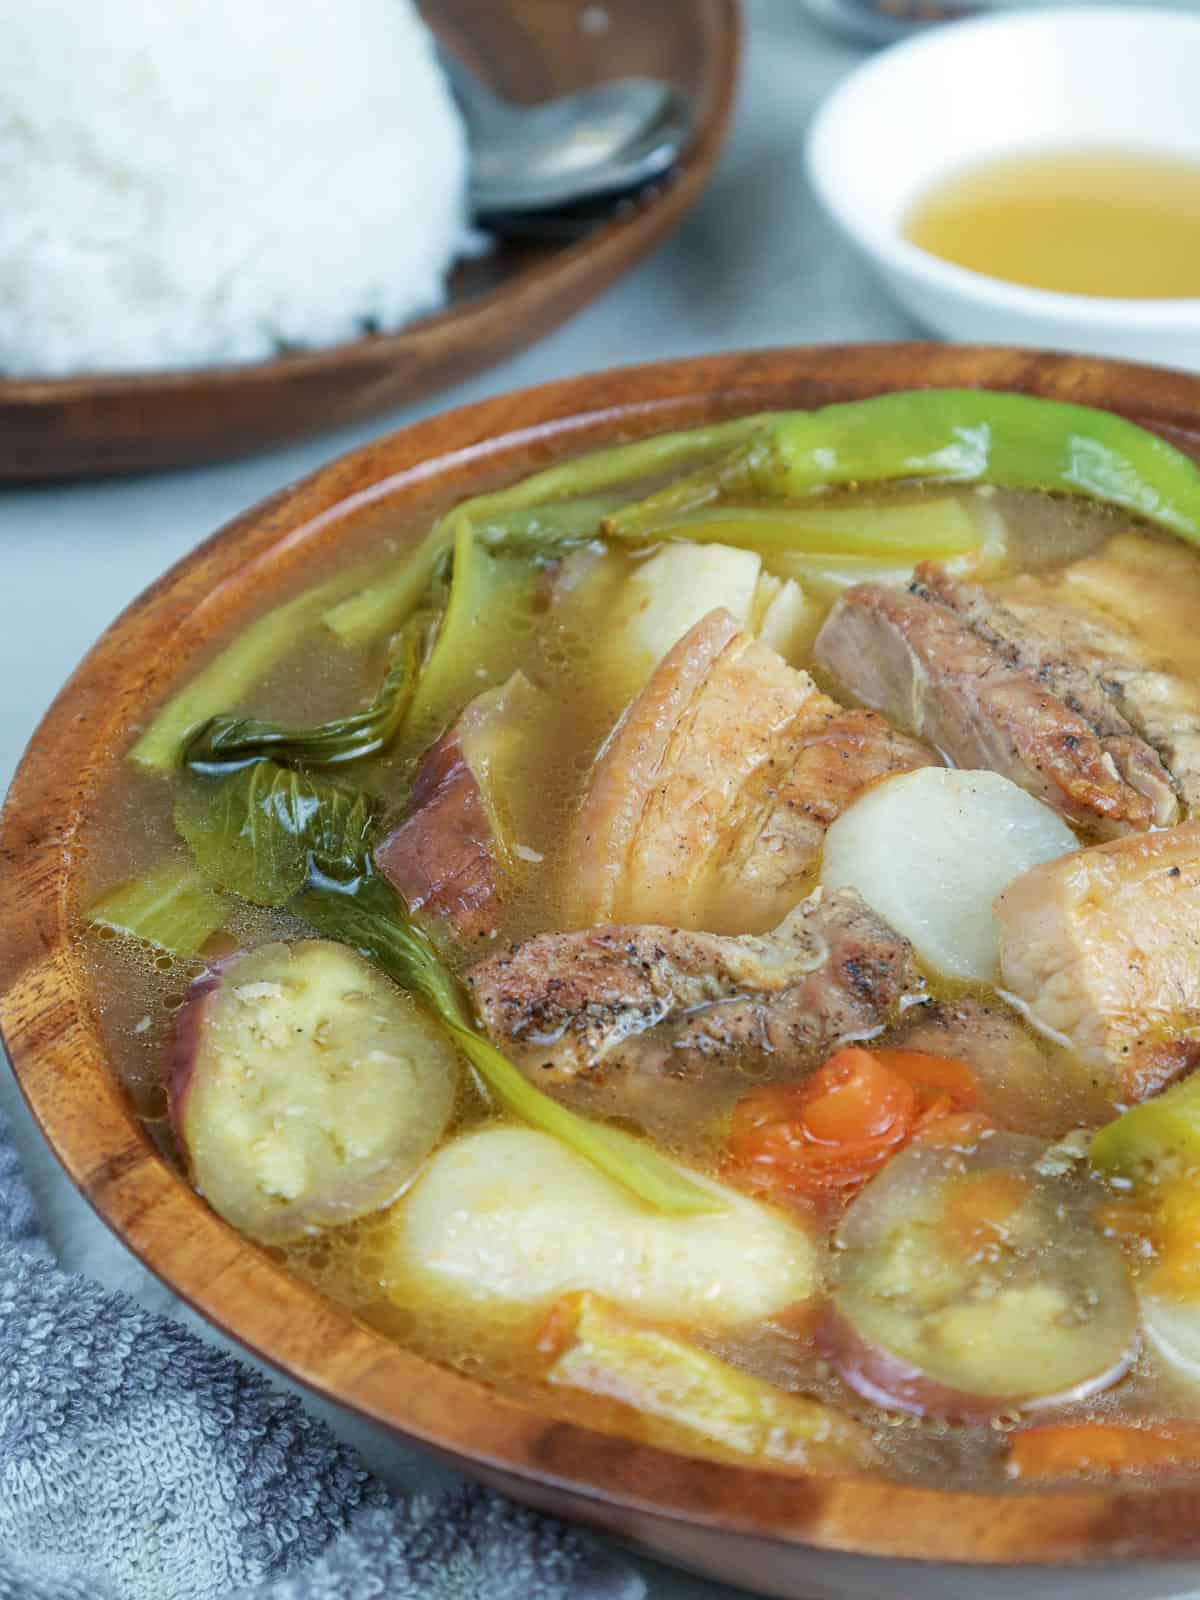 sinigang with grilled pork belly in a serving bowl with a side of steamed rice and fish sauce